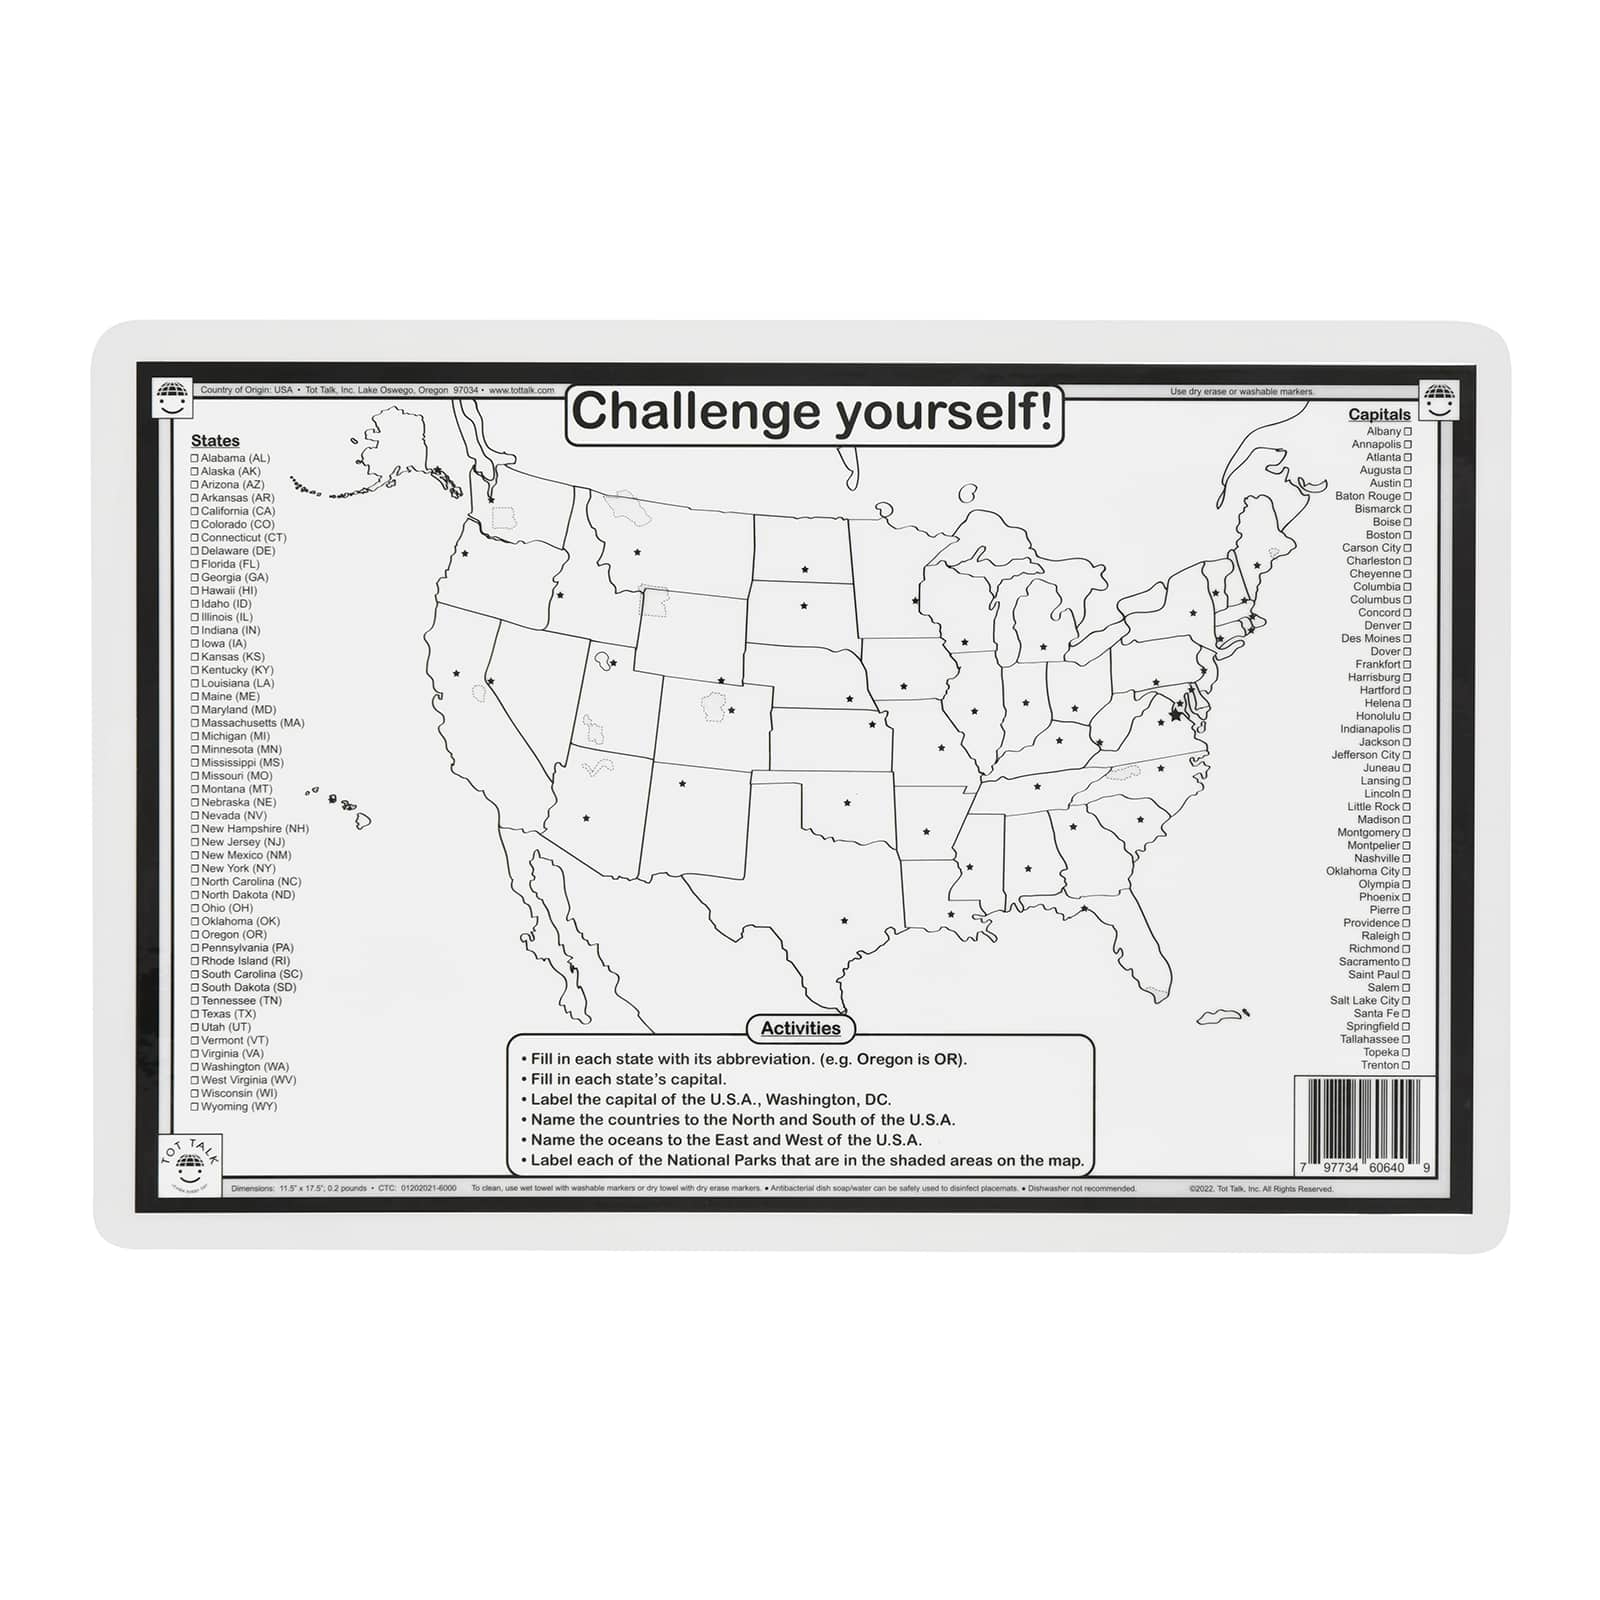 Tot Talk United States Of America Placemat